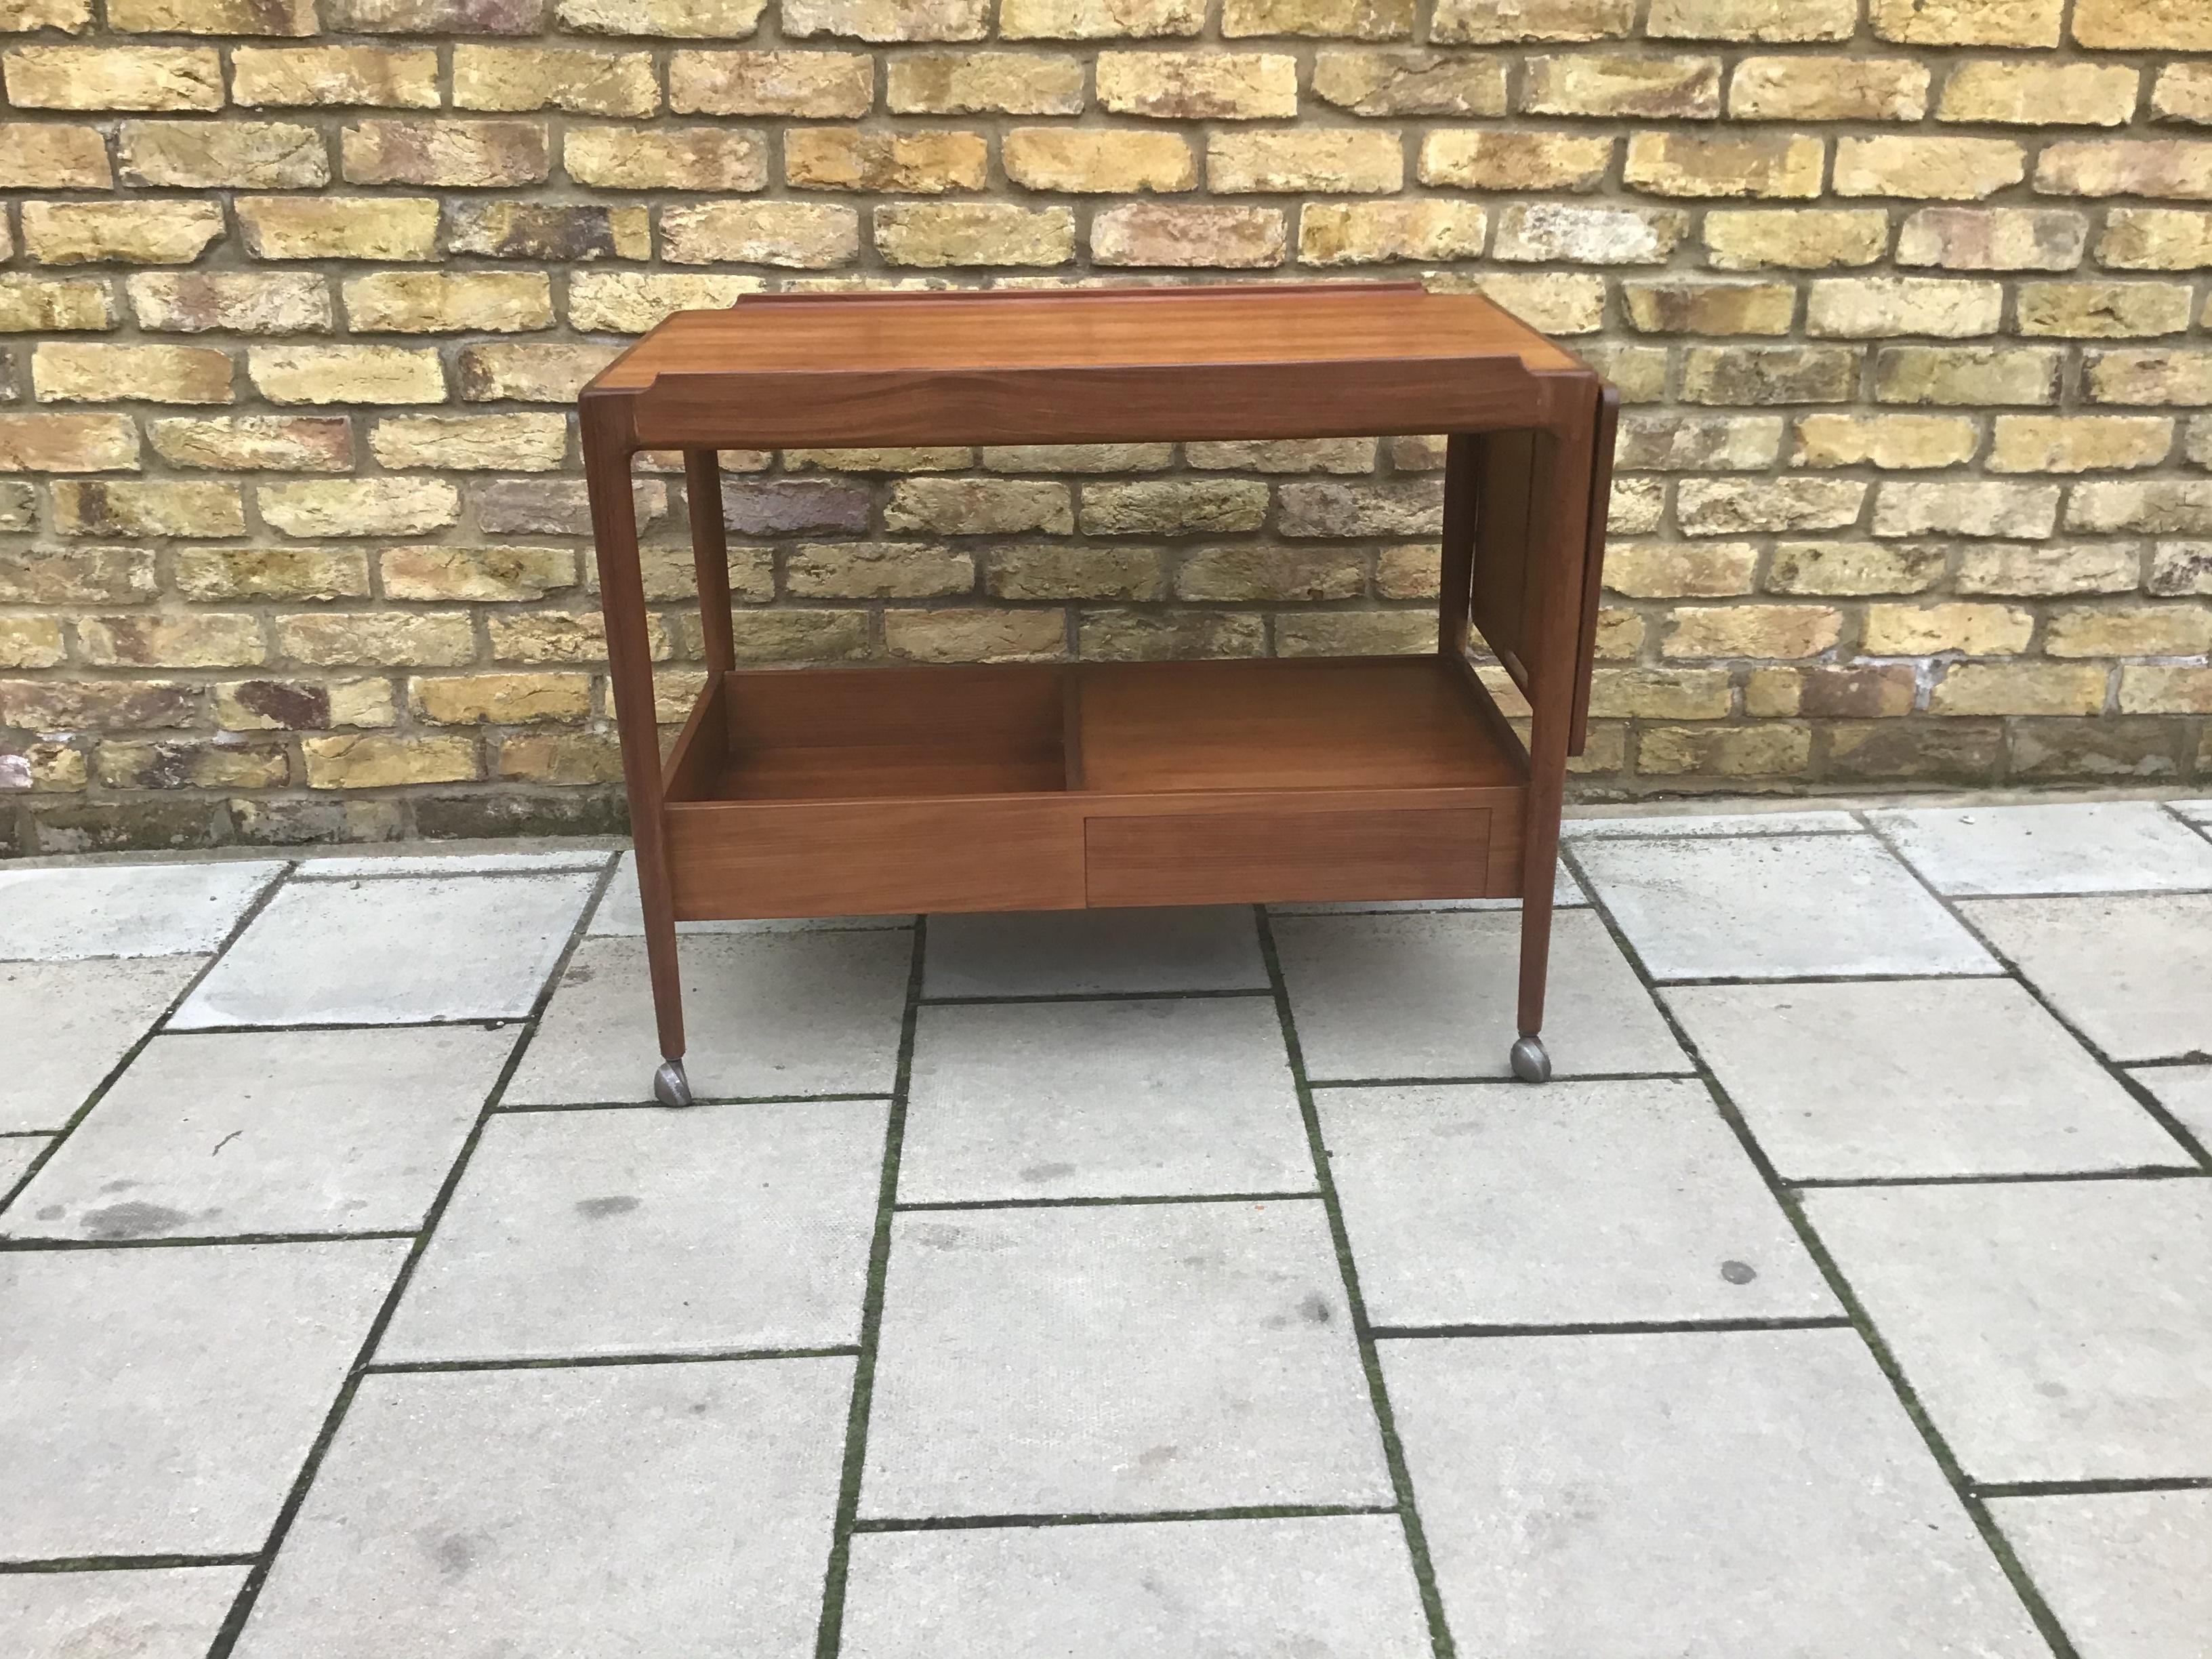 stunning 1960s G-plan tea trolley which was designed by the Danish designer, Kofod Larsen. He produced G-plans Danish range during the 1960s and the tea trolley is one of the rarer items that is on the market. The trolley is in good condition for